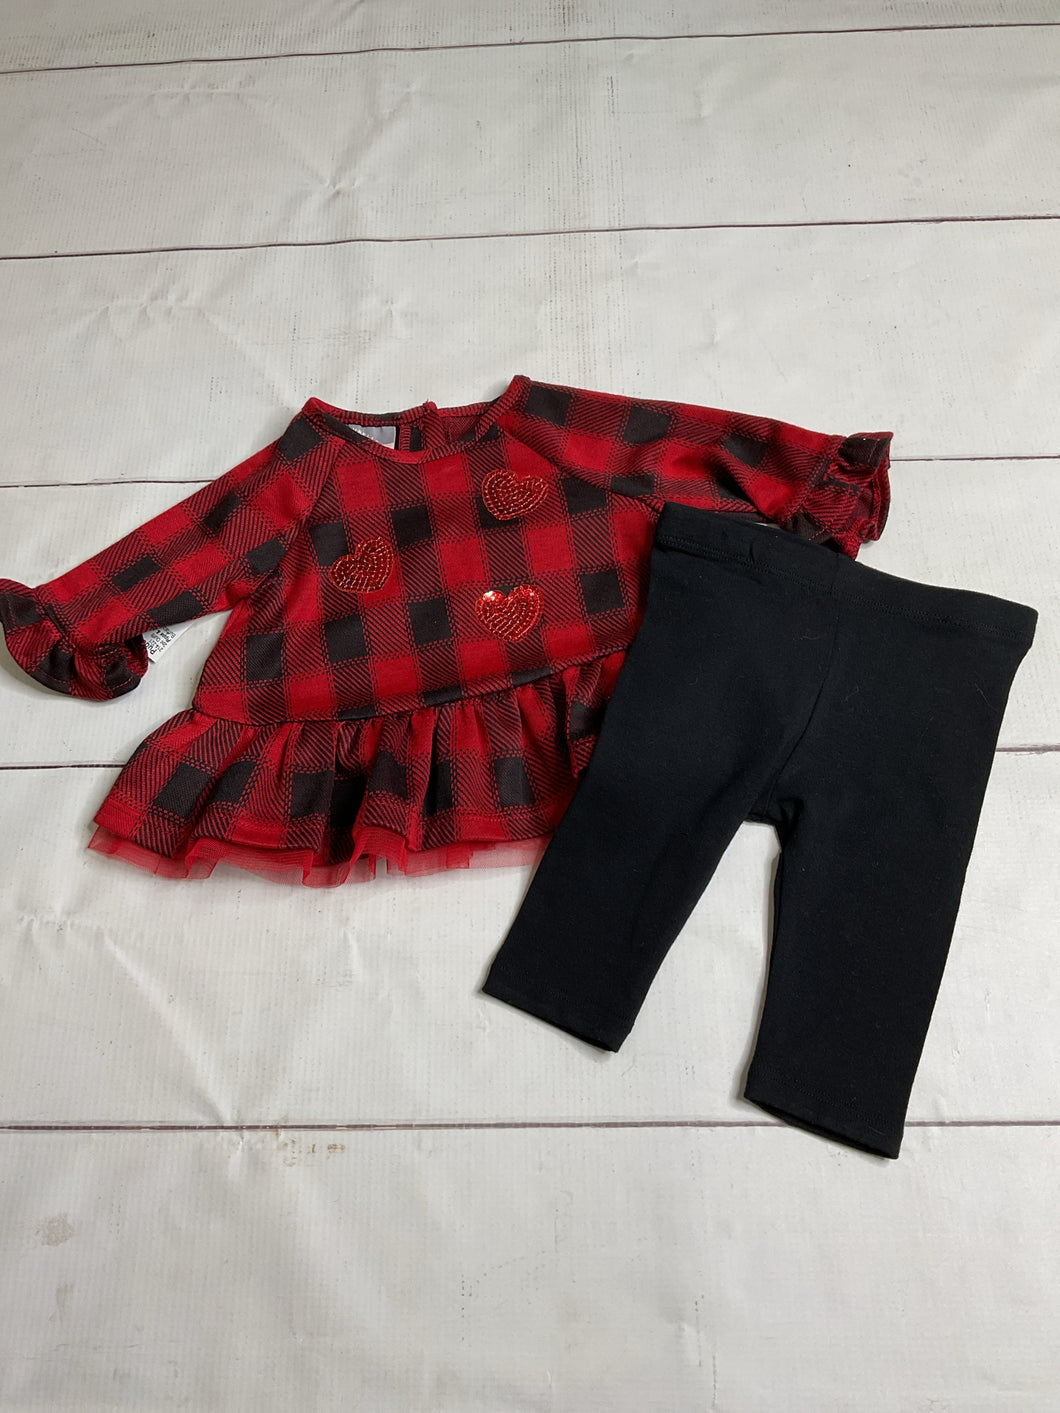 Pippa & Julie Size 3/6M 2pc Outfit